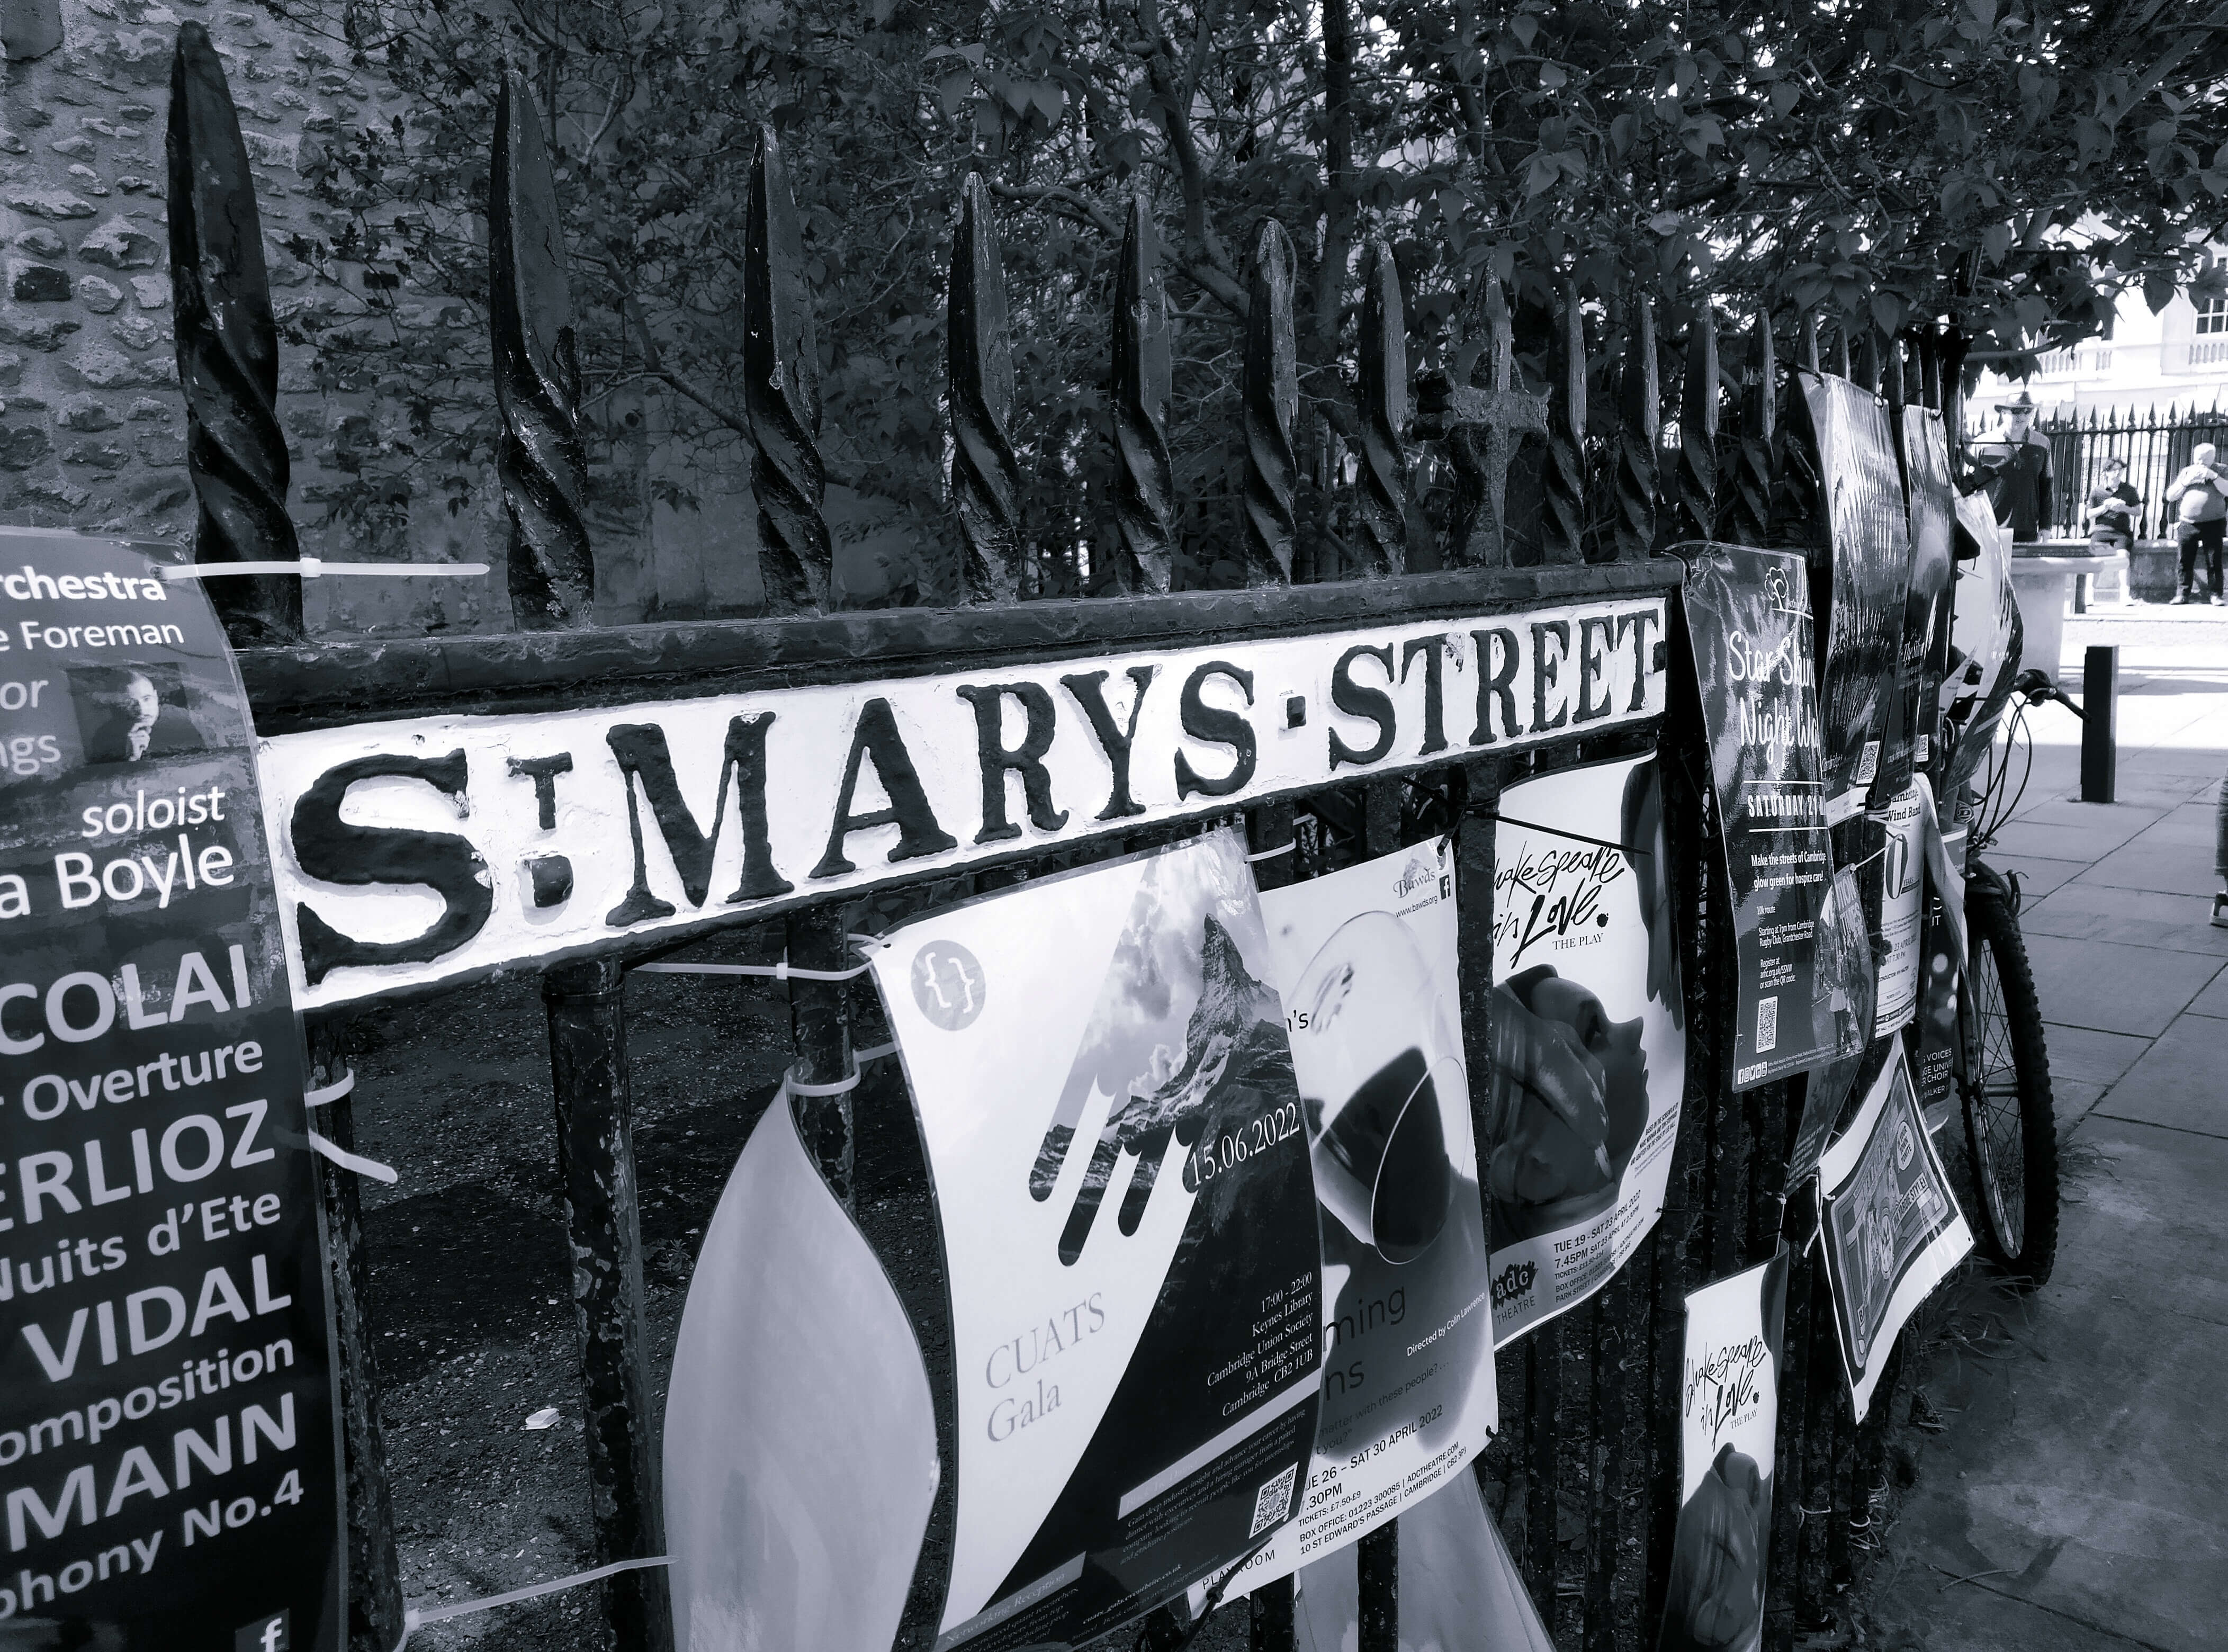 A sign for Saint Mary's Street surrounded by flyers